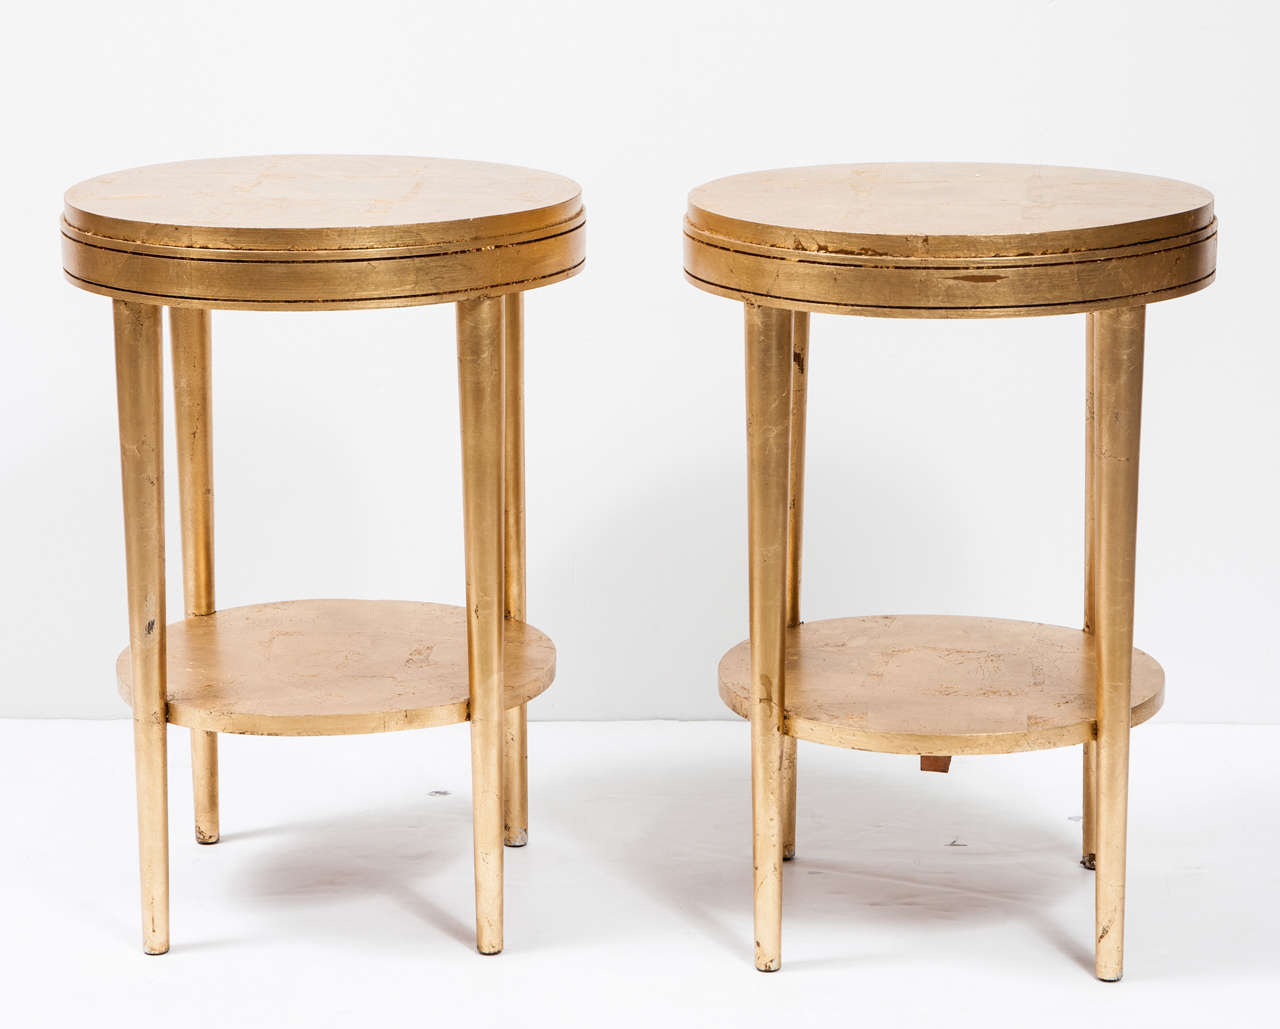 A chic and stylish pair of giltwood round side tables with lower shelf and slightly tapered legs.